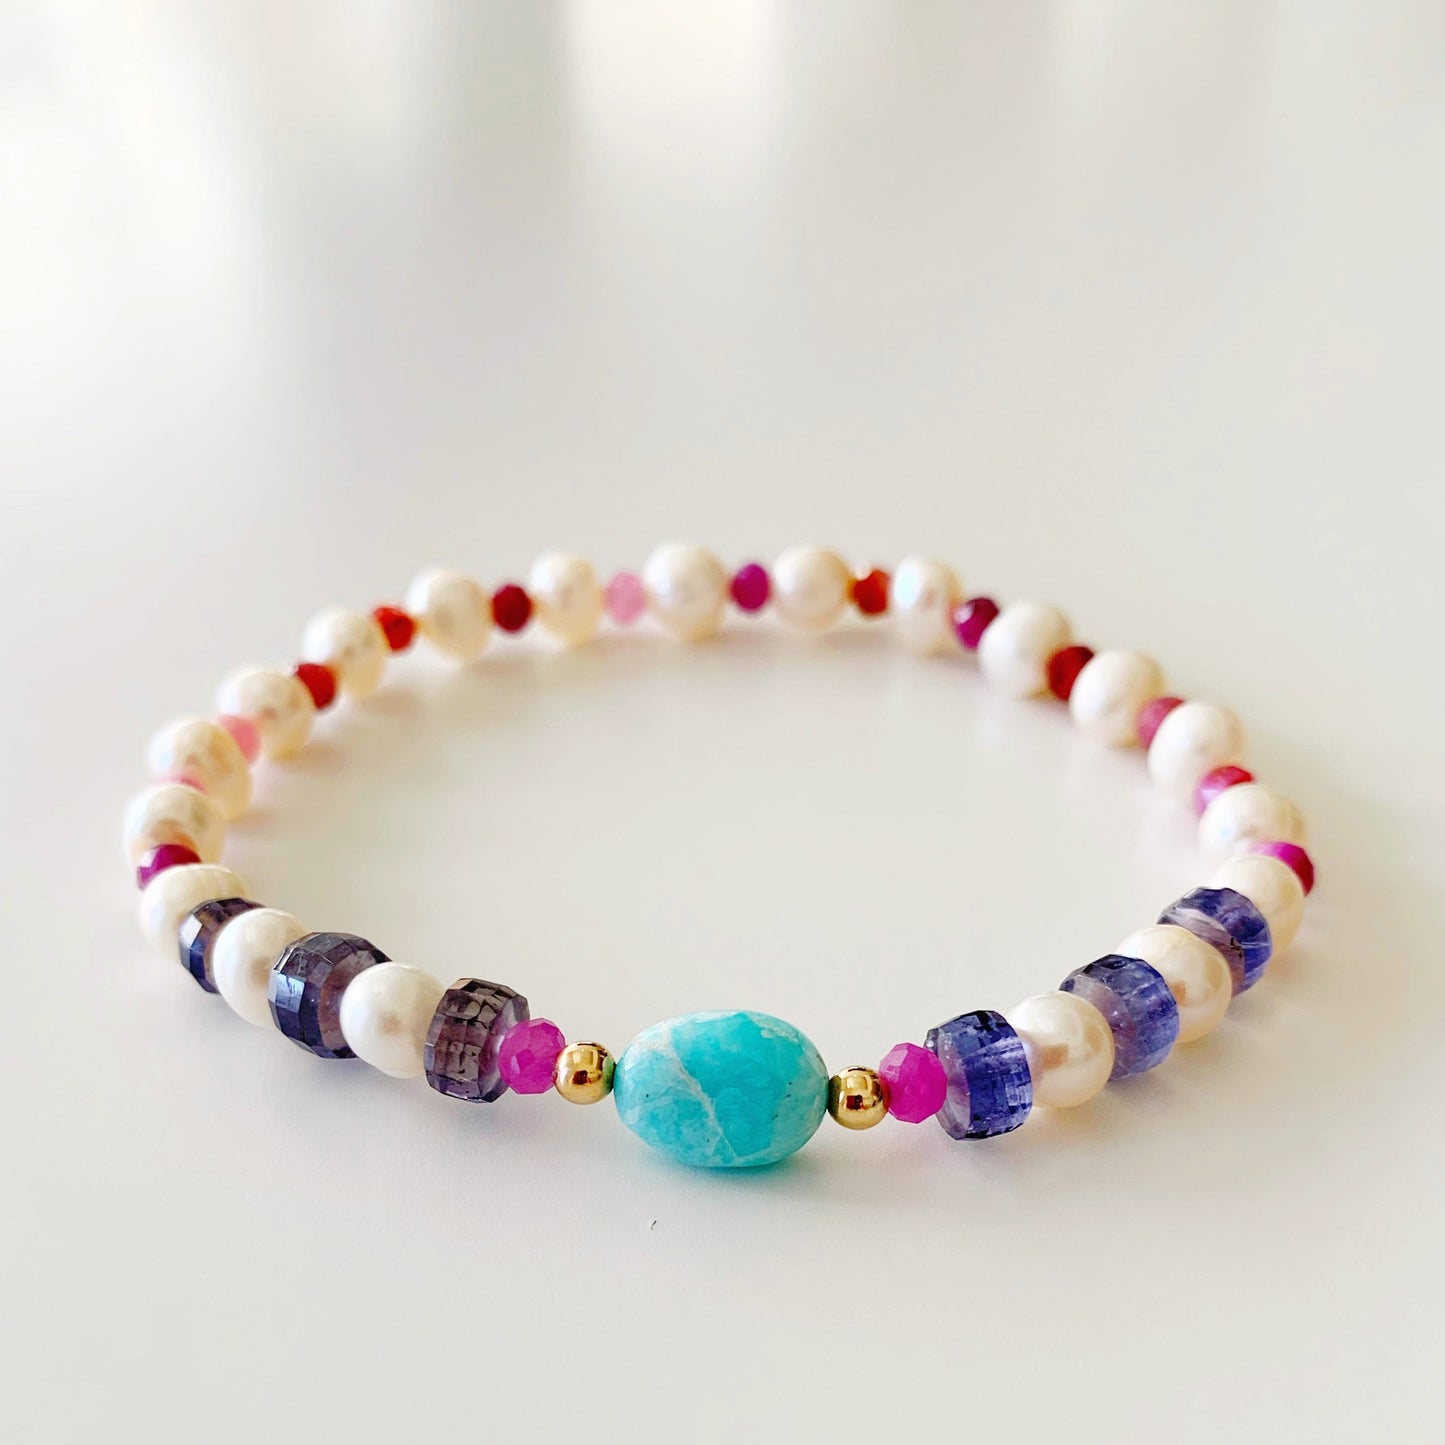 the sunset cruise stretch bracelet by mermaids and madeleines is a once of a kind created with amazonite in the center with 14k gold filled beads and then complimented by freshwater pearls, iolite tire beads and natural ruby faceted rondelles. this bracelet is photographed flat on a white surface